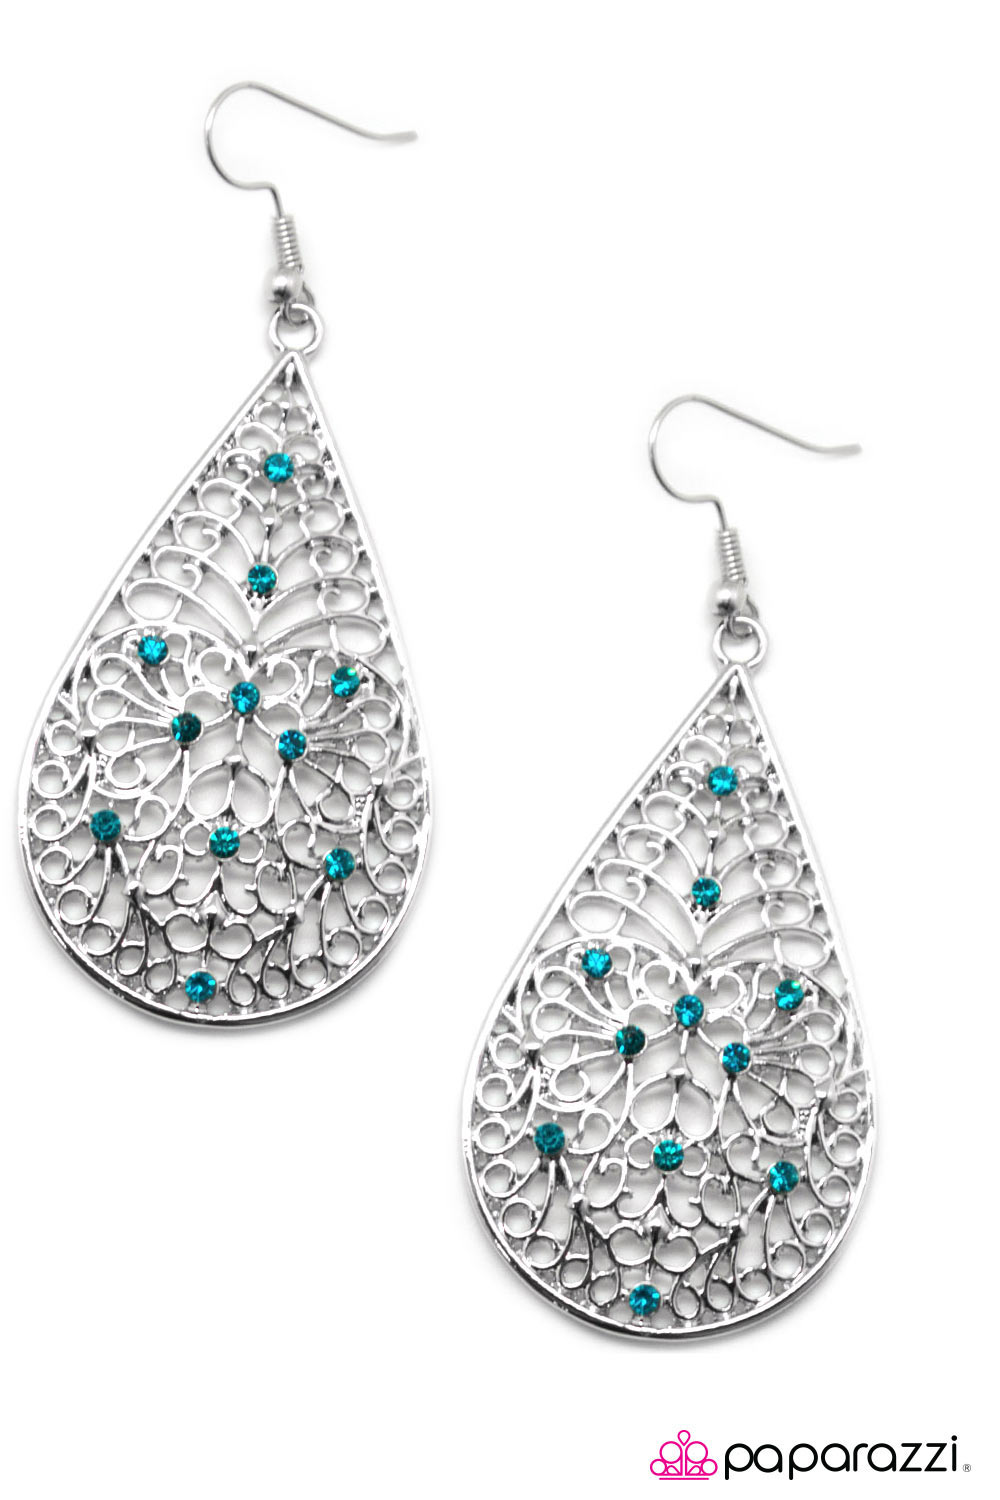 Paparazzi ♥ At First Glance - Blue ♥  Earrings